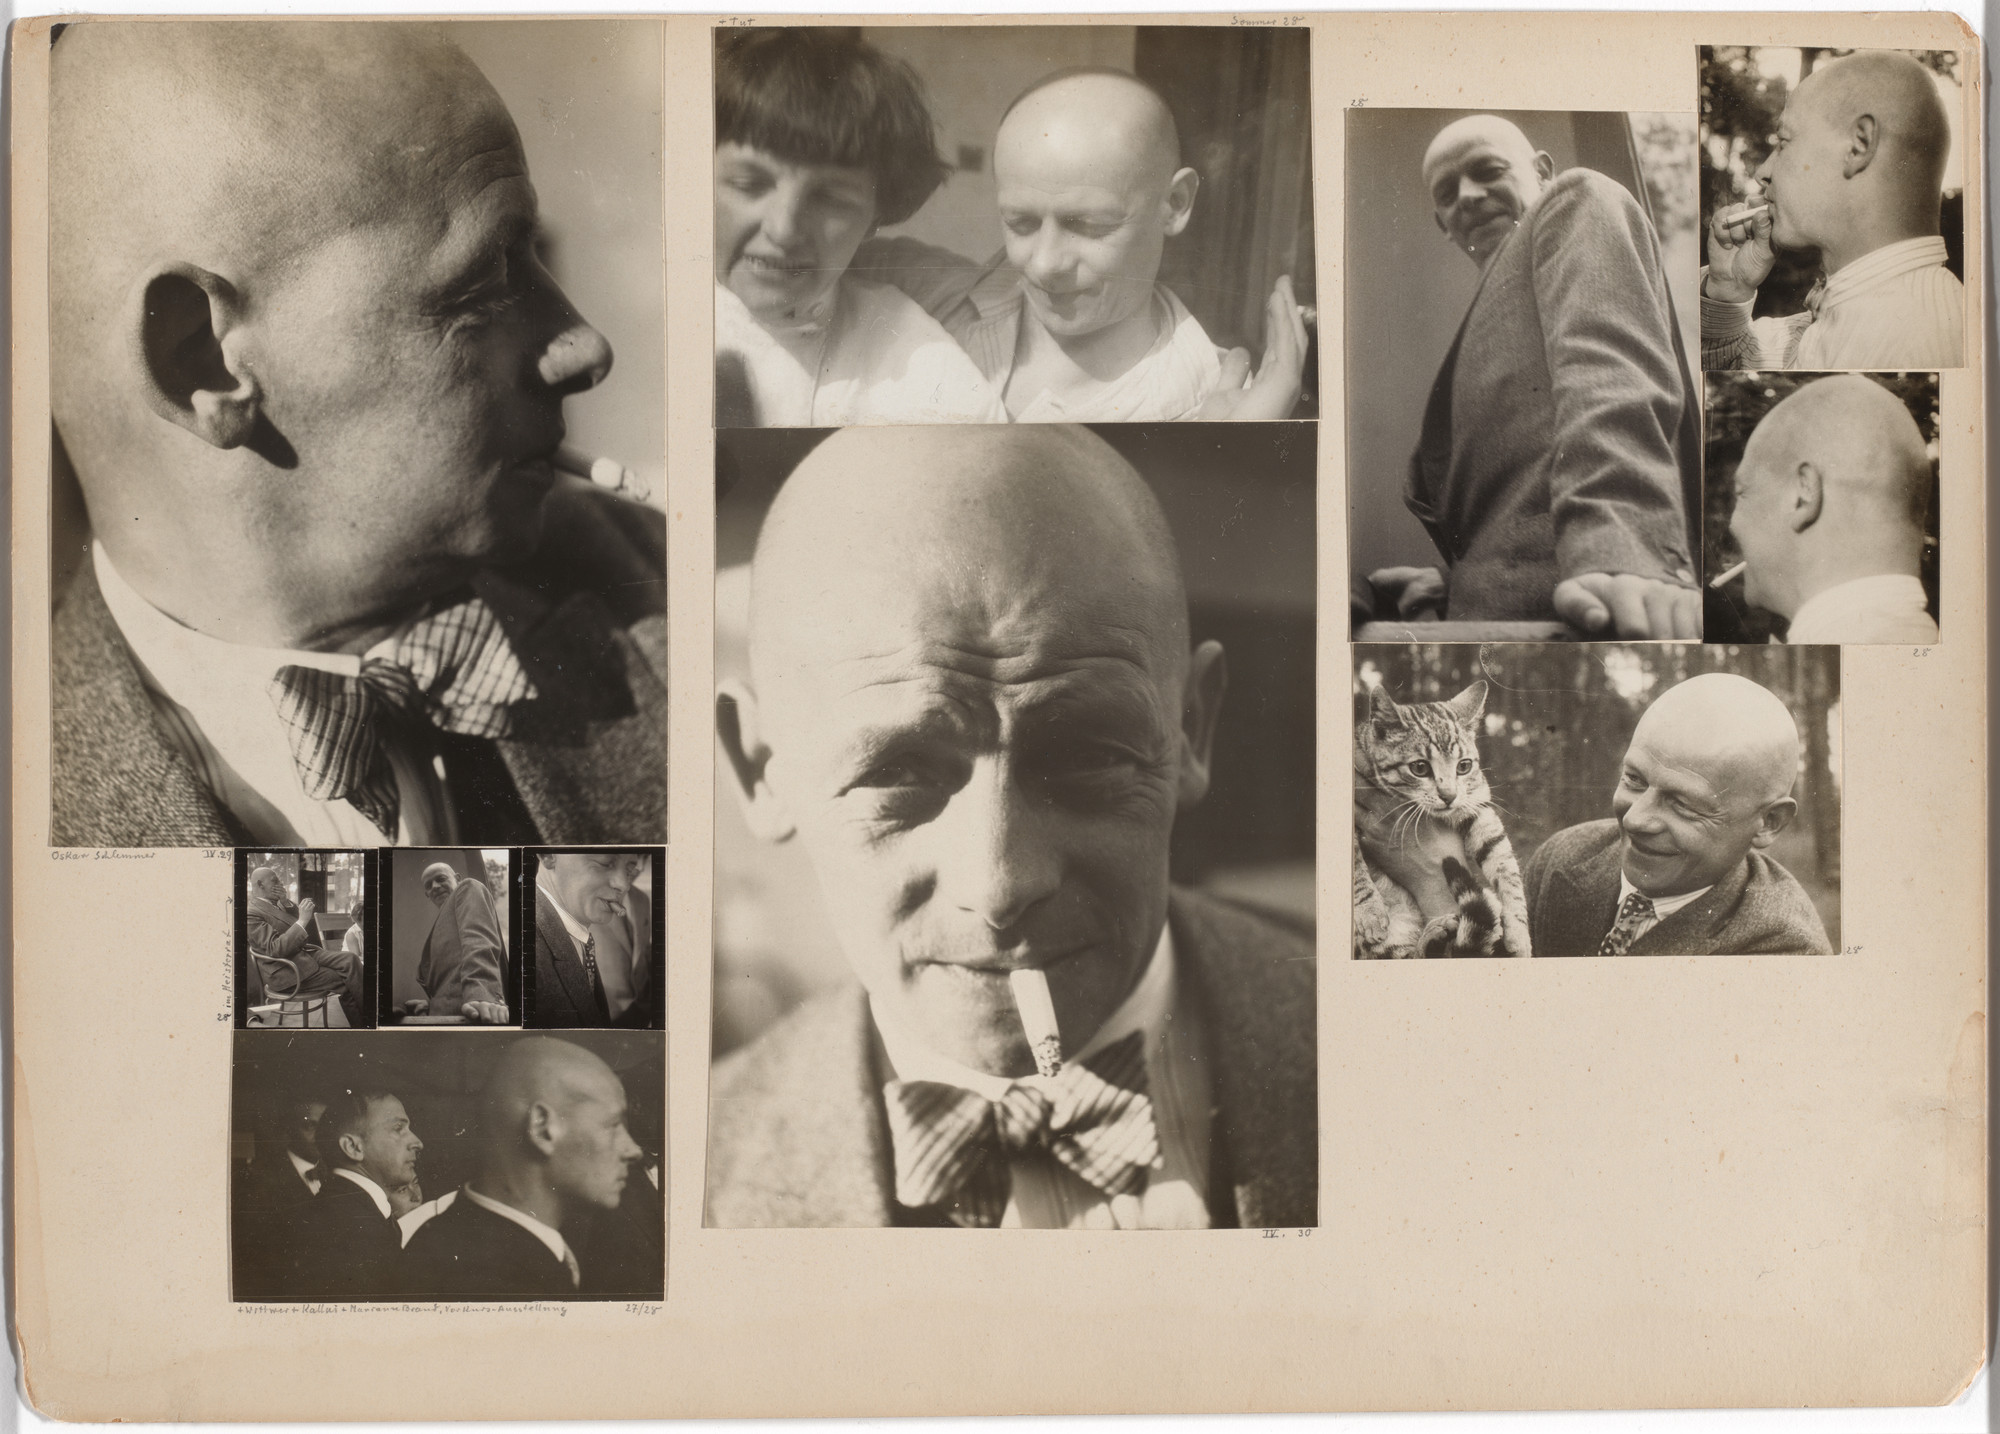 One and One Is Four: The Bauhaus Photocollages of Josef Albers | MoMA